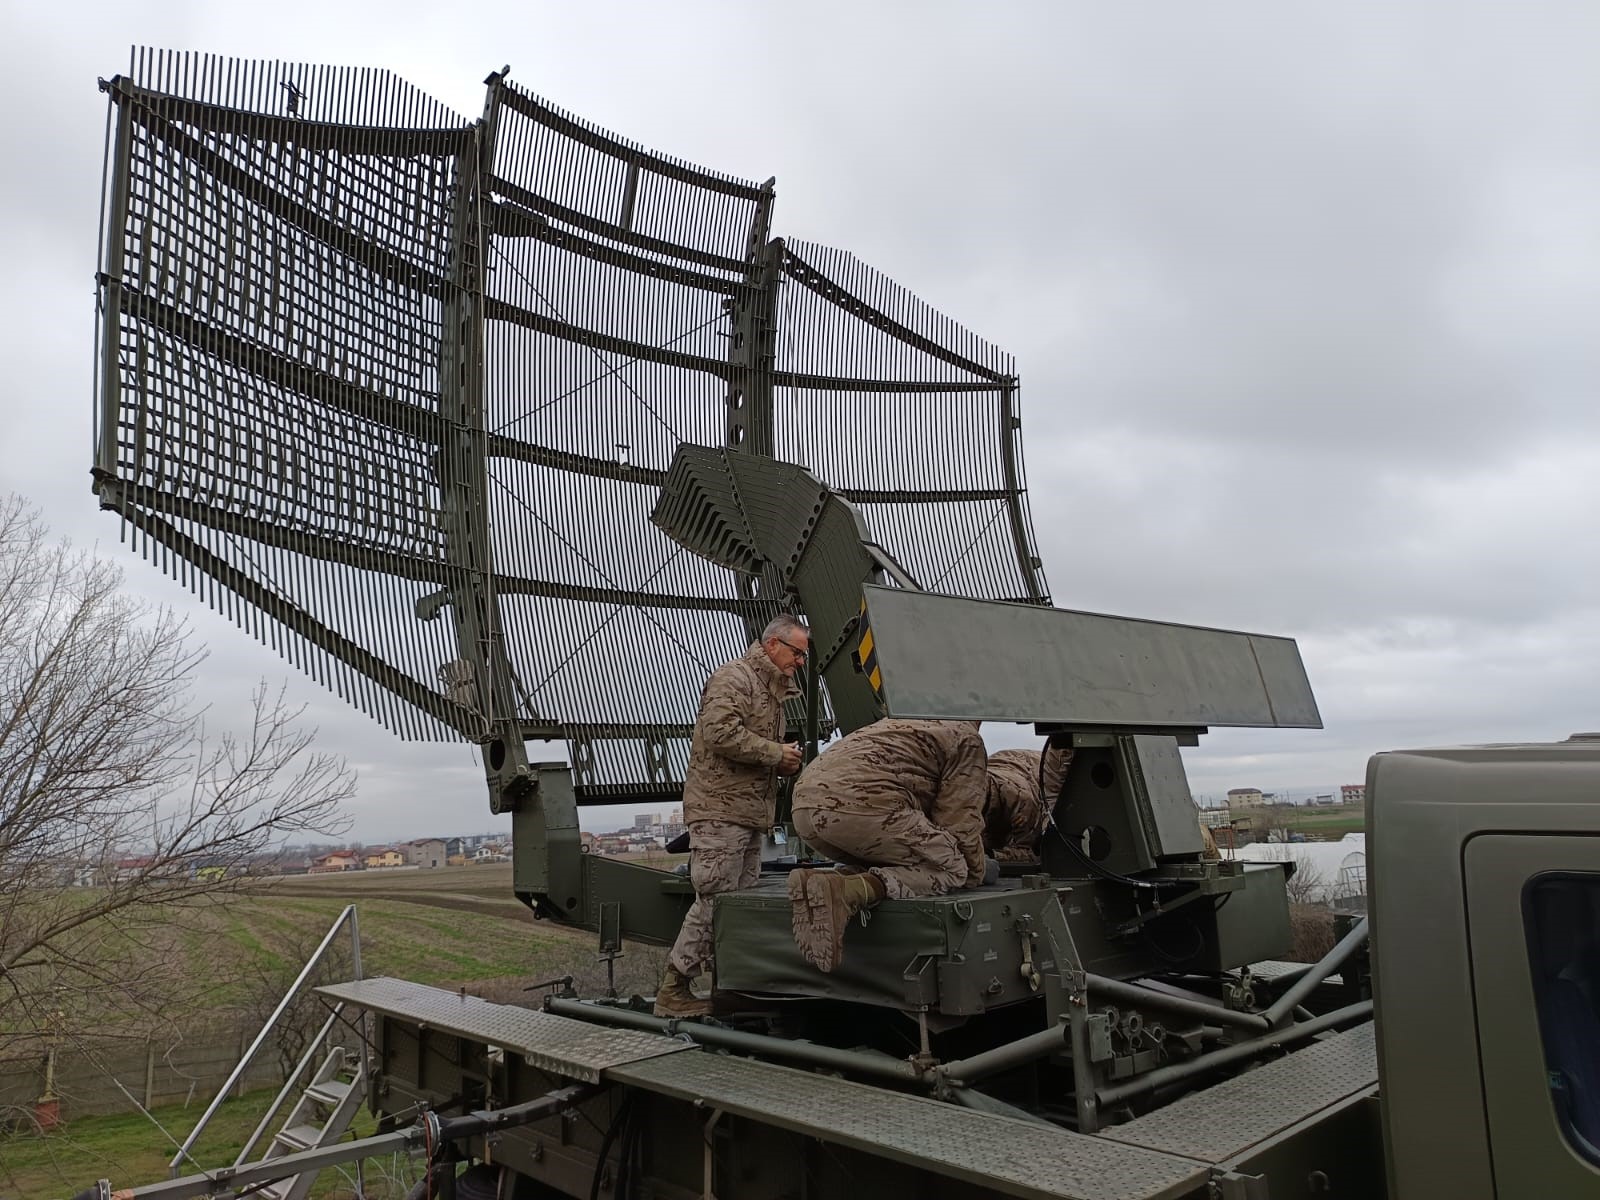 Working in the AN/TPS-43M radar.